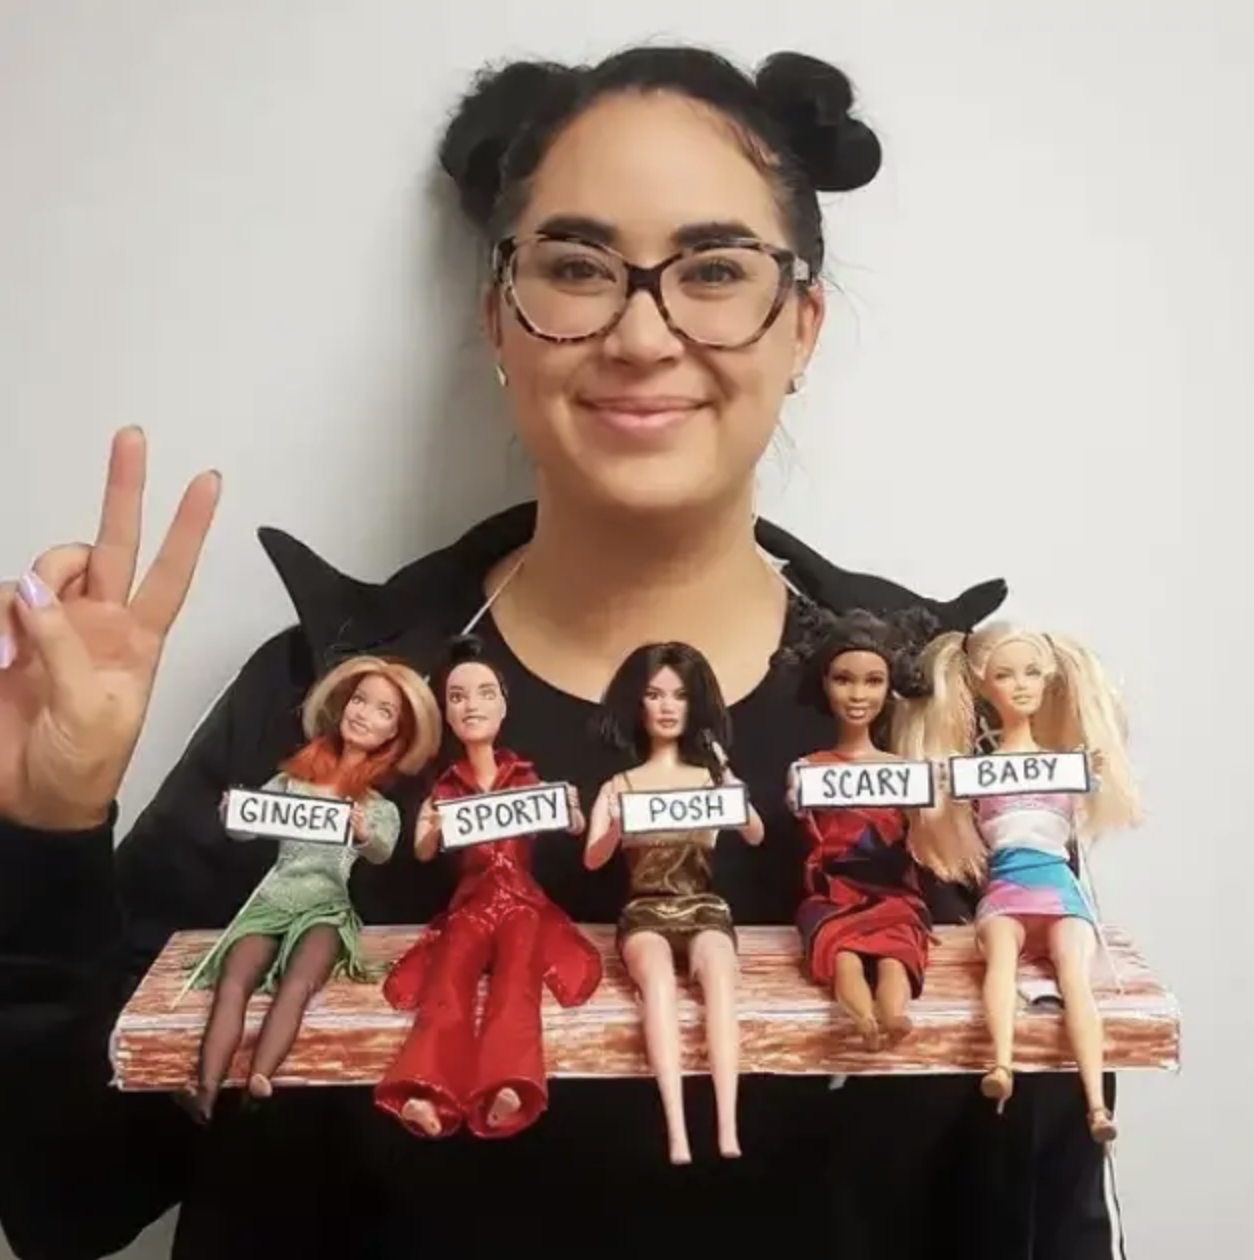 A woman with a board around her neck and barbies for each spice girl